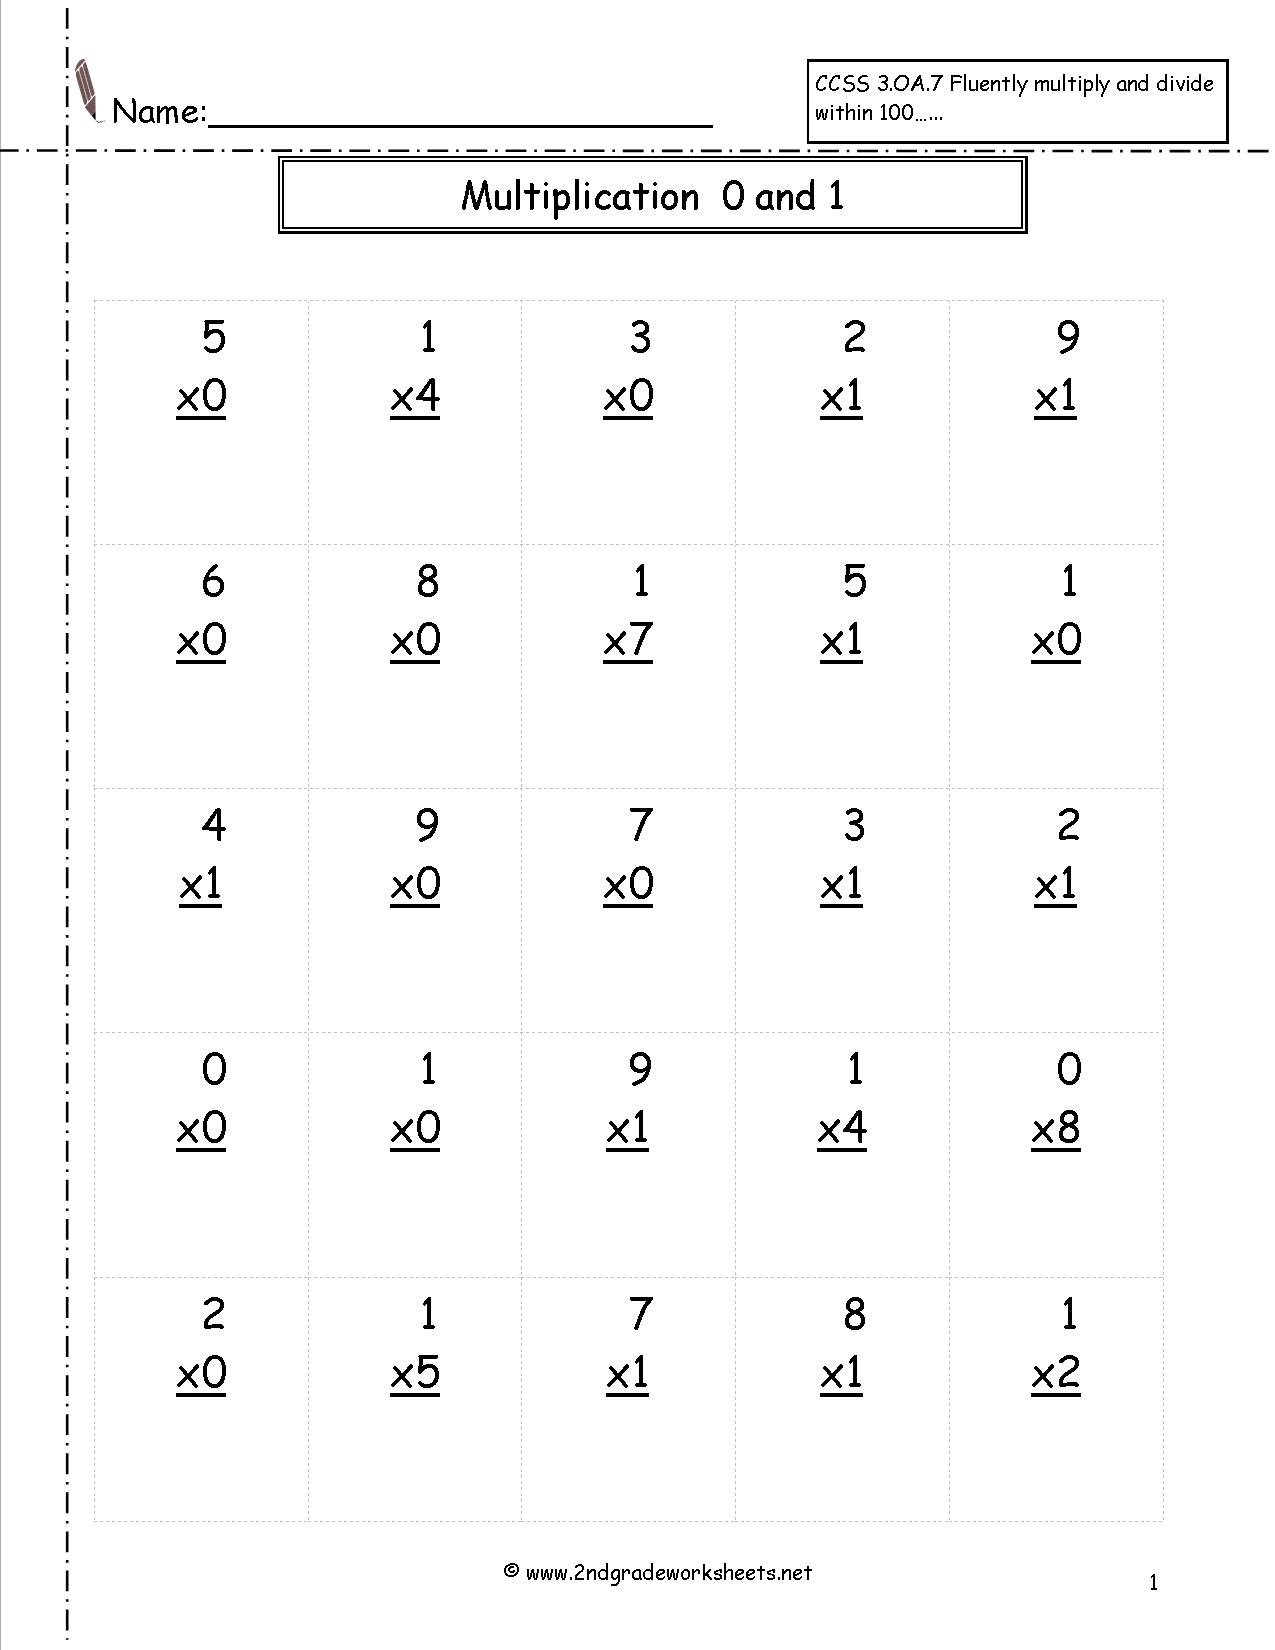 Multiplication Worksheets And Printouts pertaining to 2 Multiplication Printable